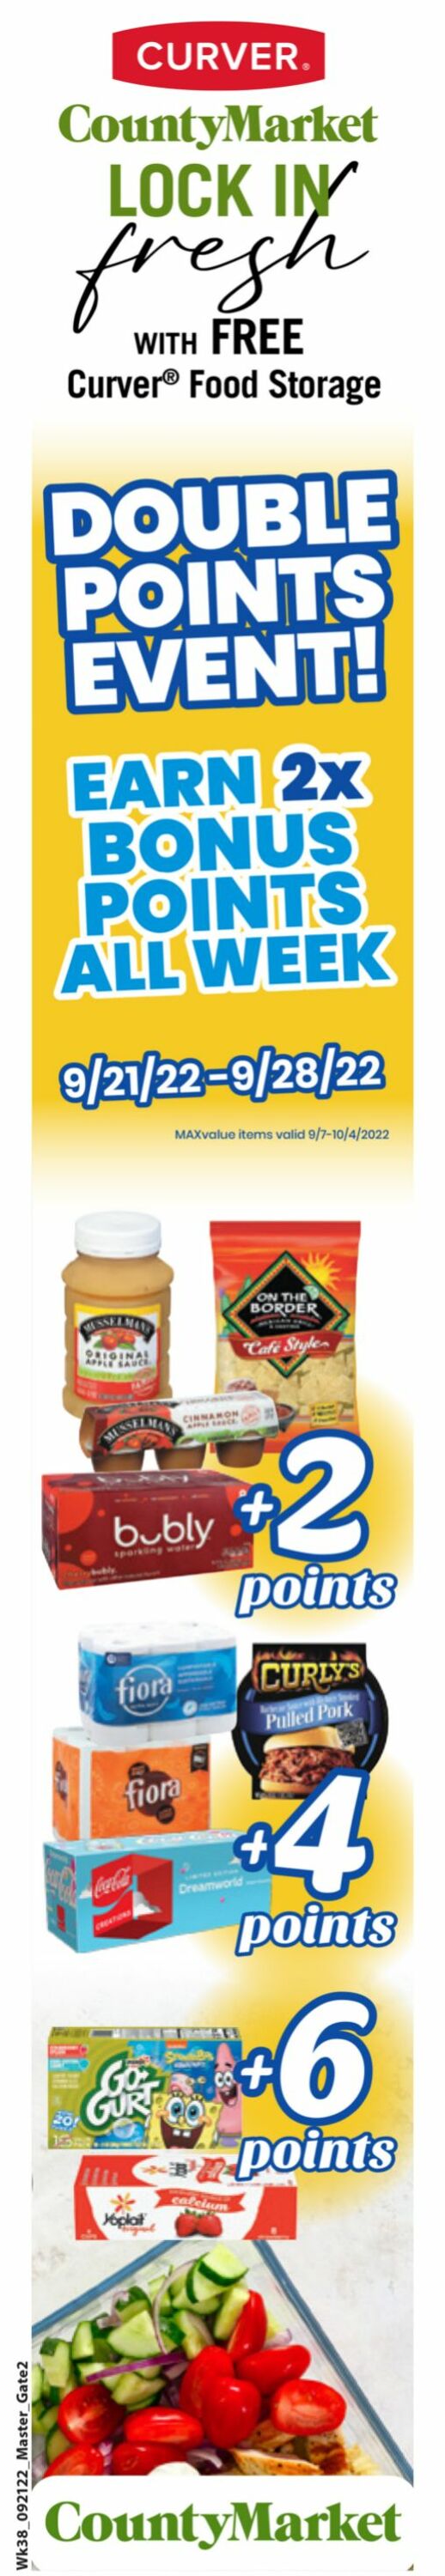 County Market Ad from 09/21/2022